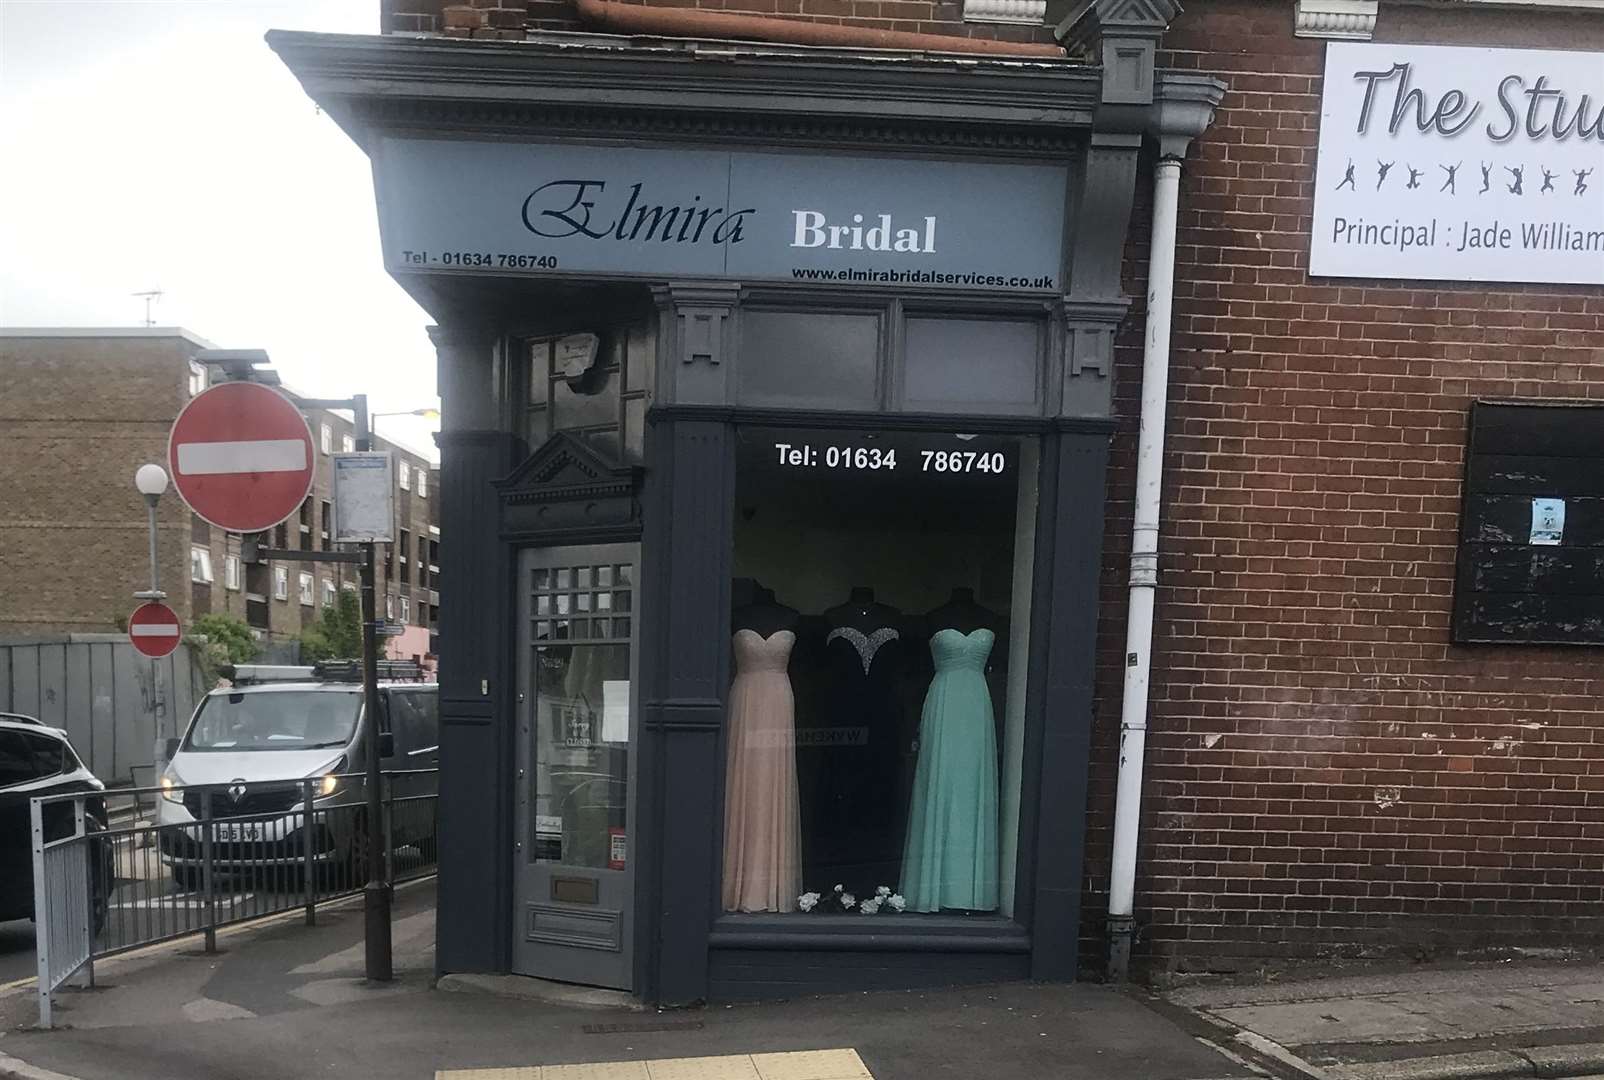 The bridal shop was targeted by thieves